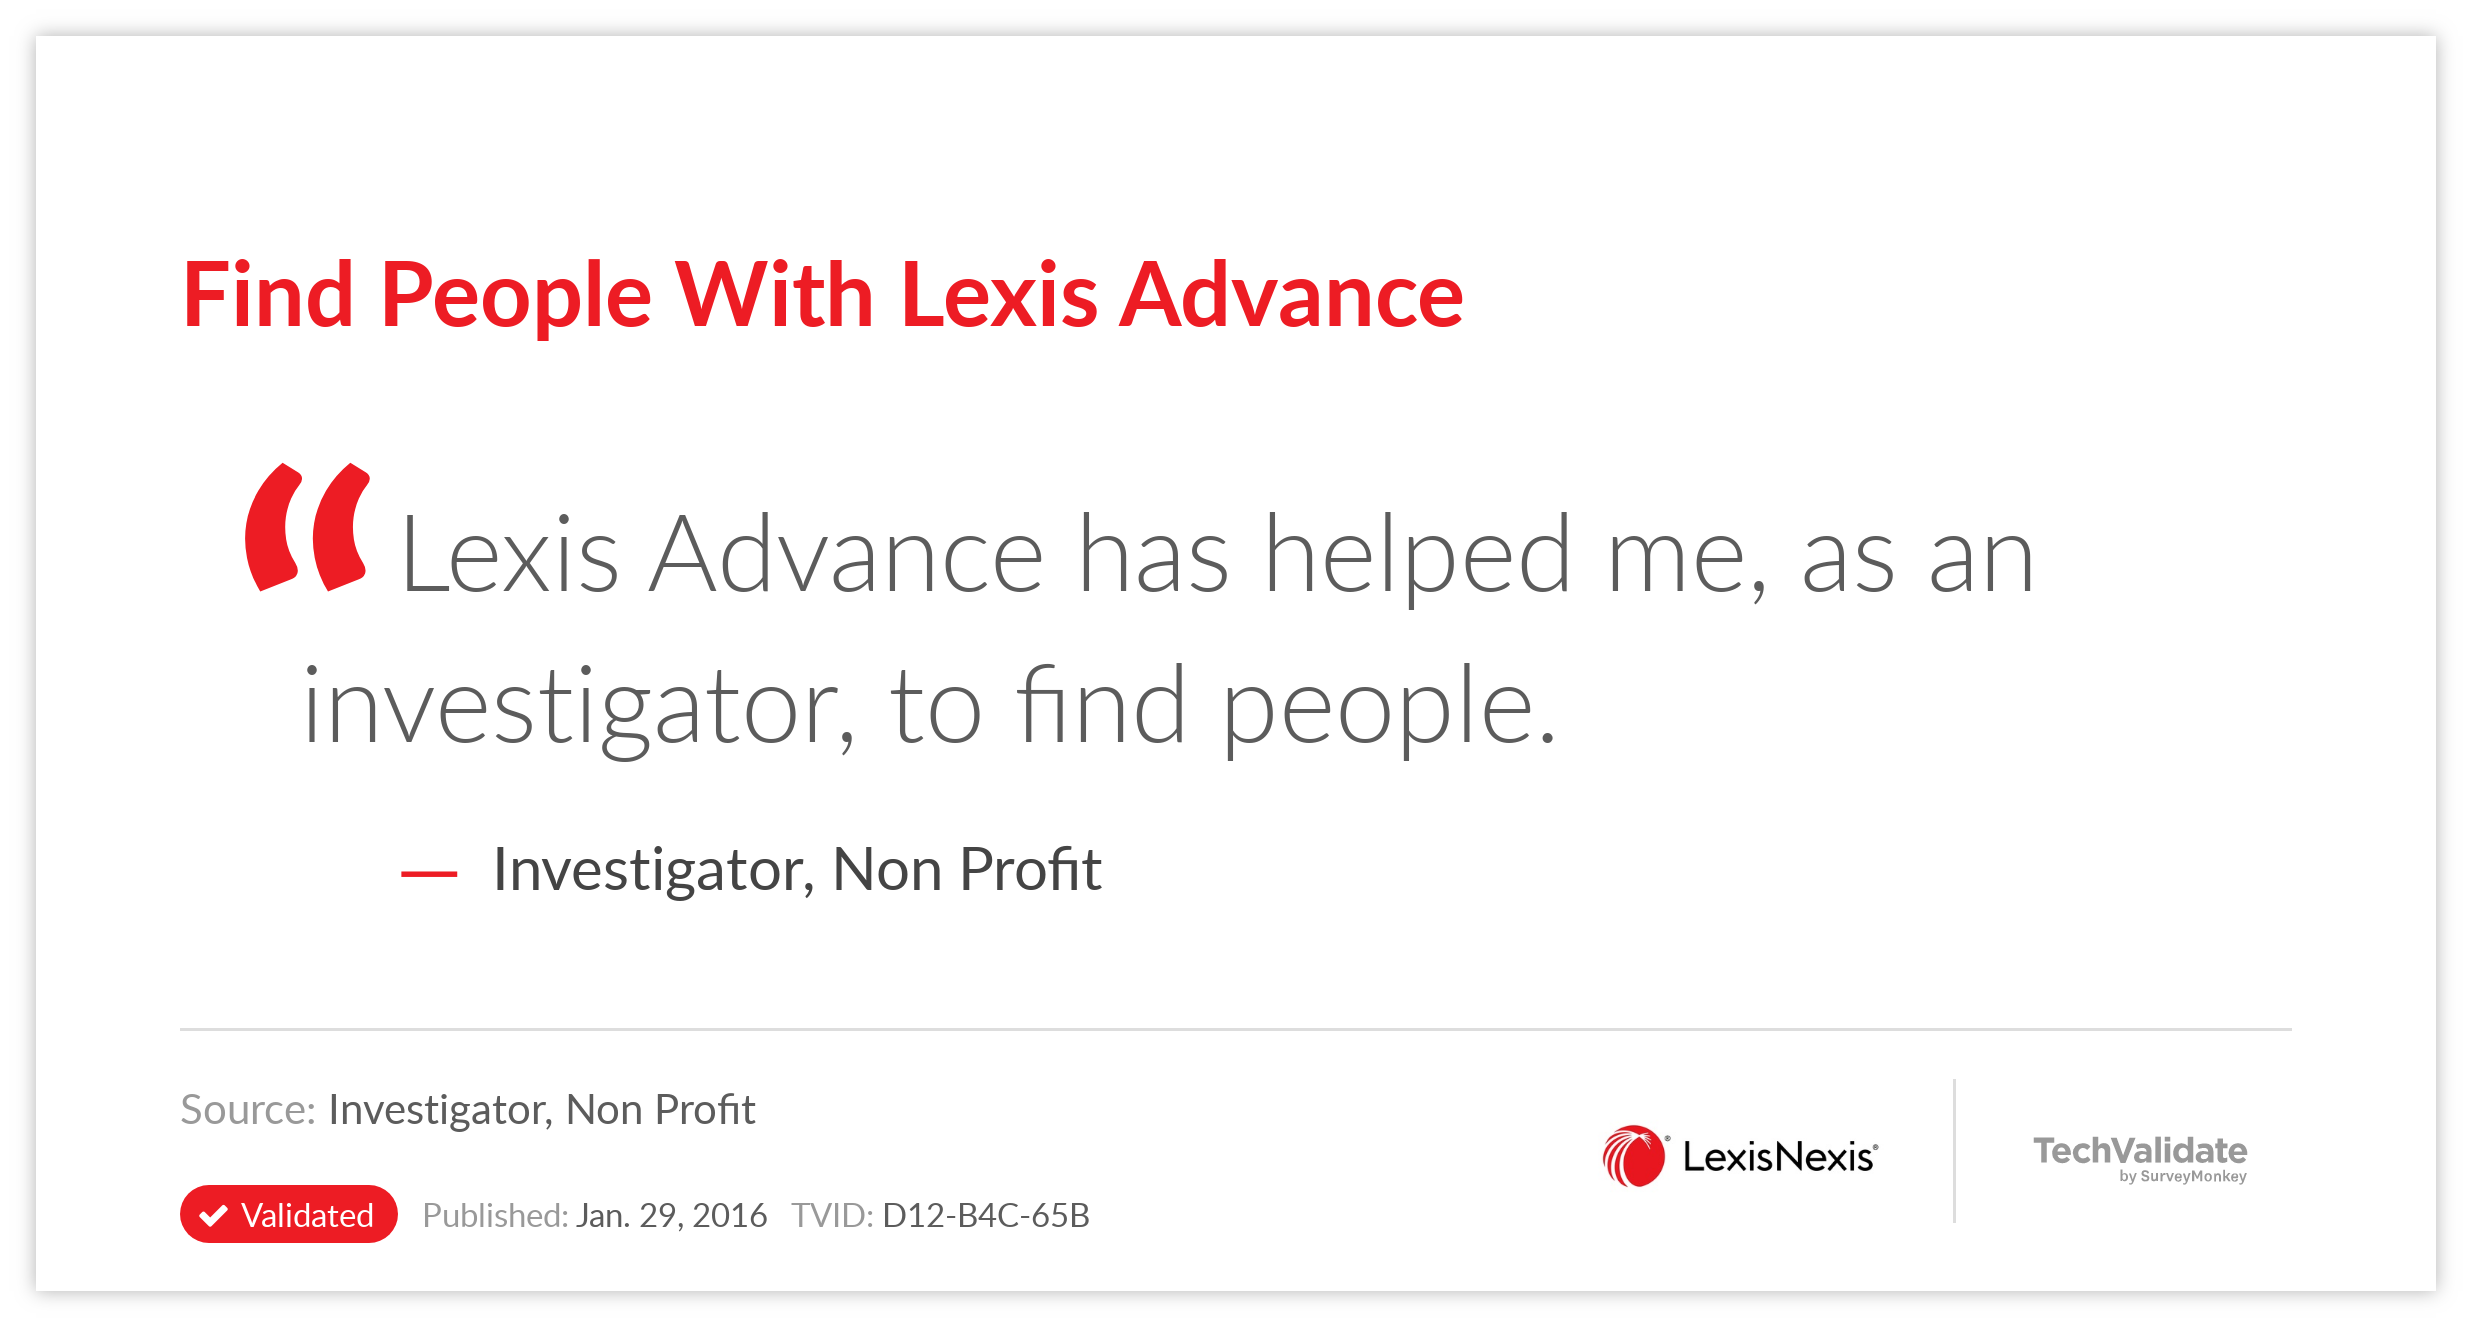 Find People With Lexis Advance